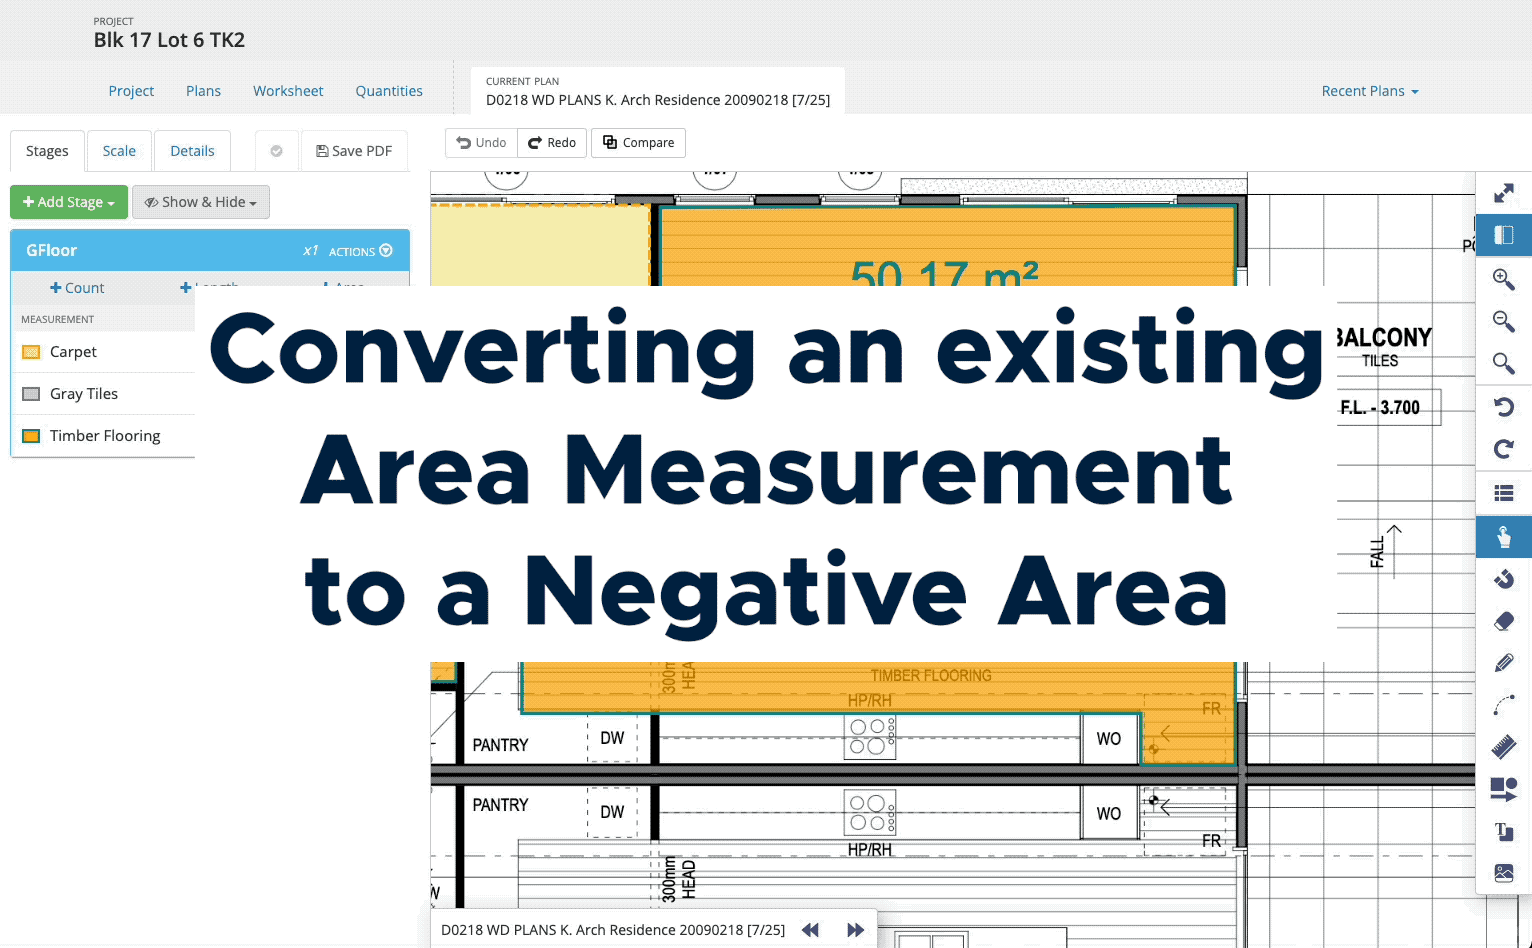 D2 - Converting an existing area measurement to negative area